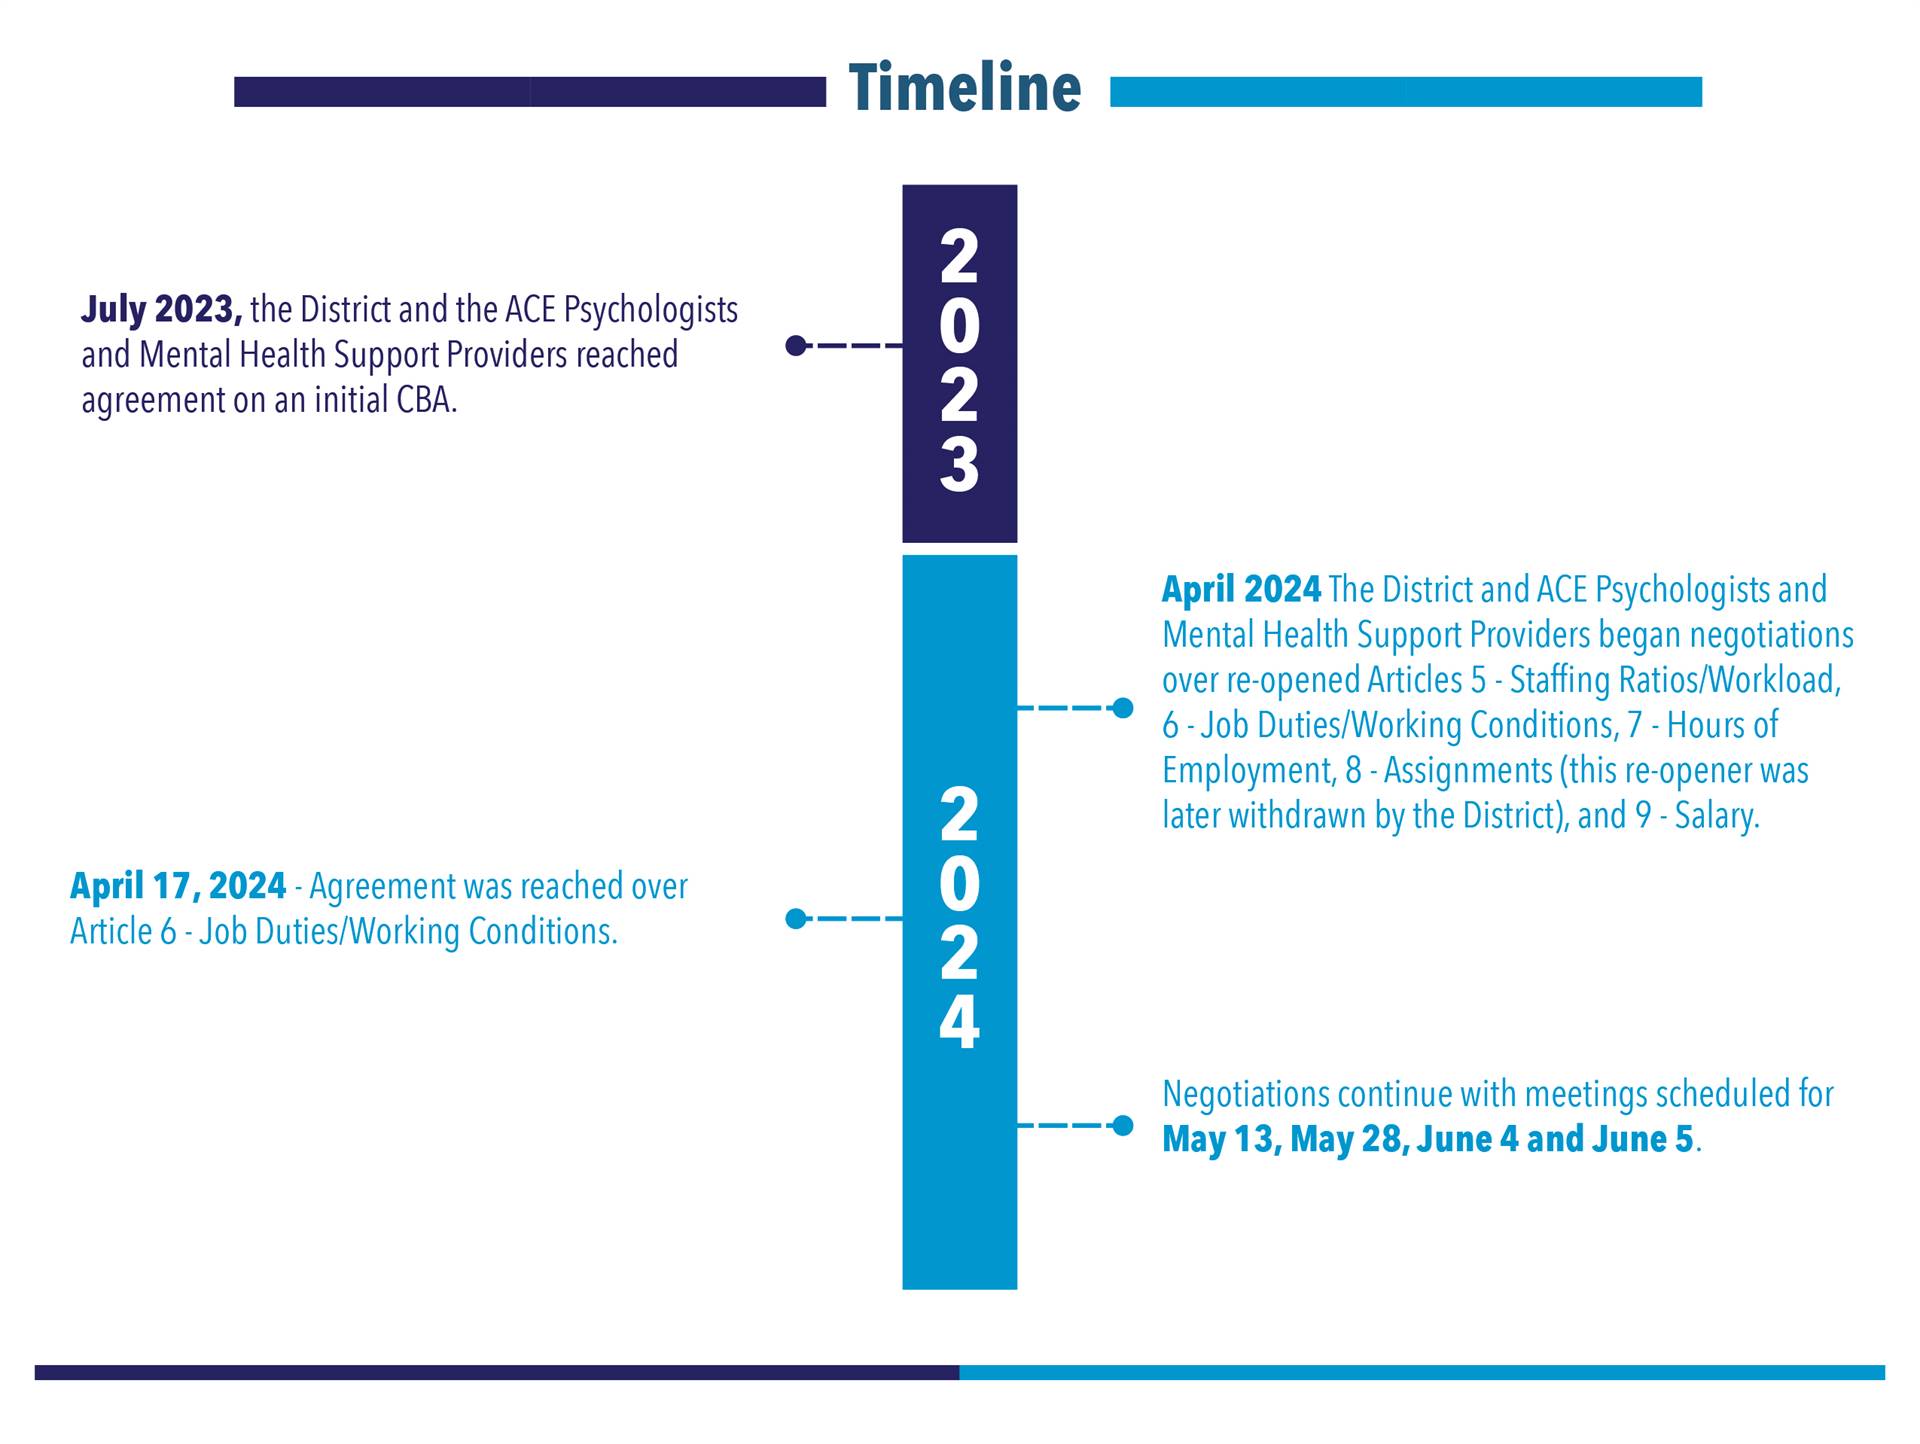 Timeline of ACE Negotiations